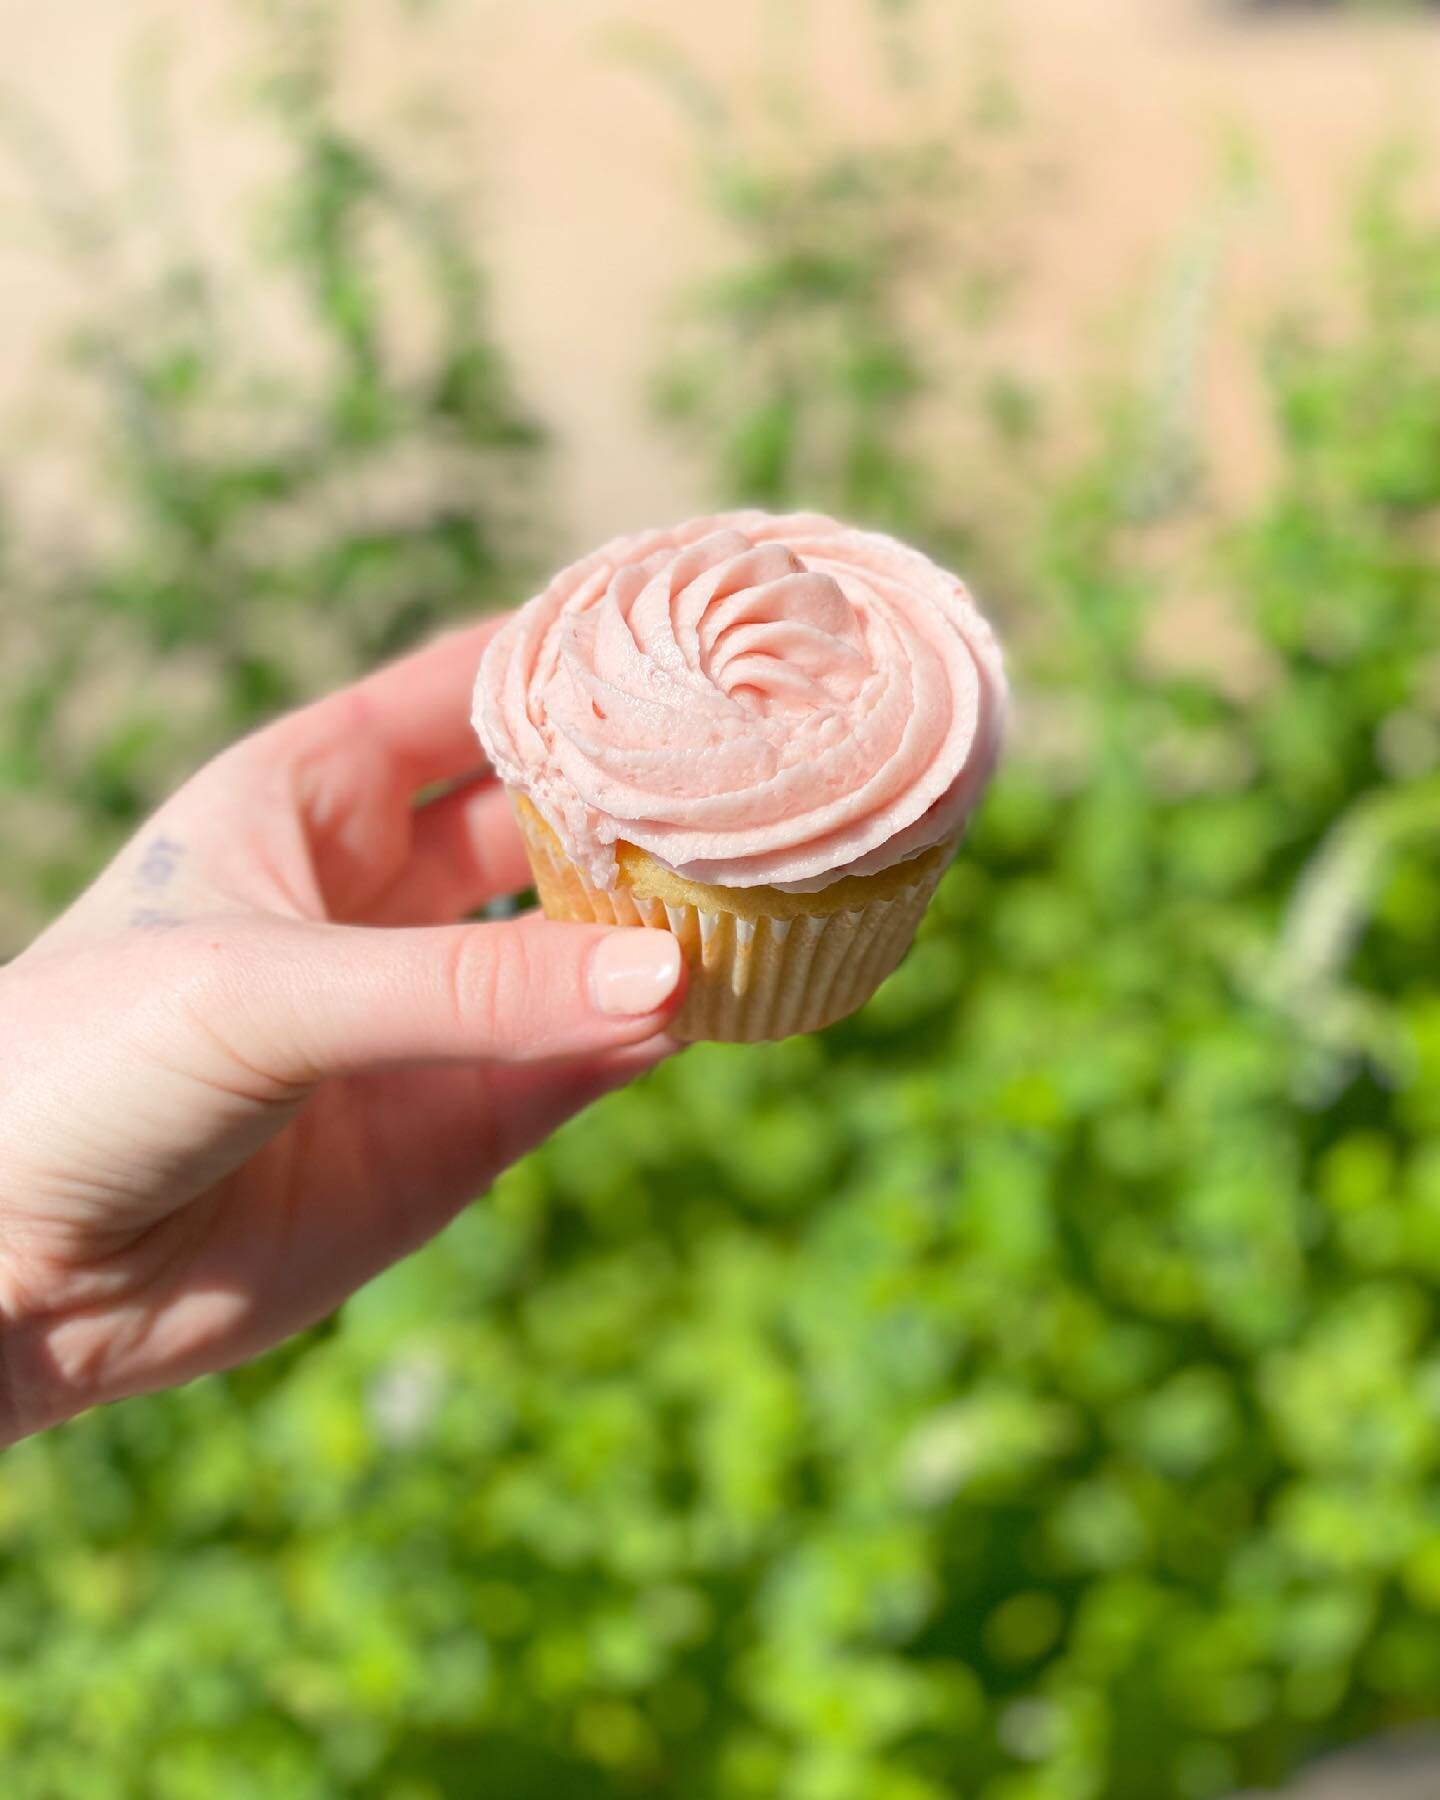 NEW! Raspberry + Vanilla cupcakes are our new seasonal cupcakes 🧁 they&rsquo;re pretty AND they taste good 😋

#mazamacoffee